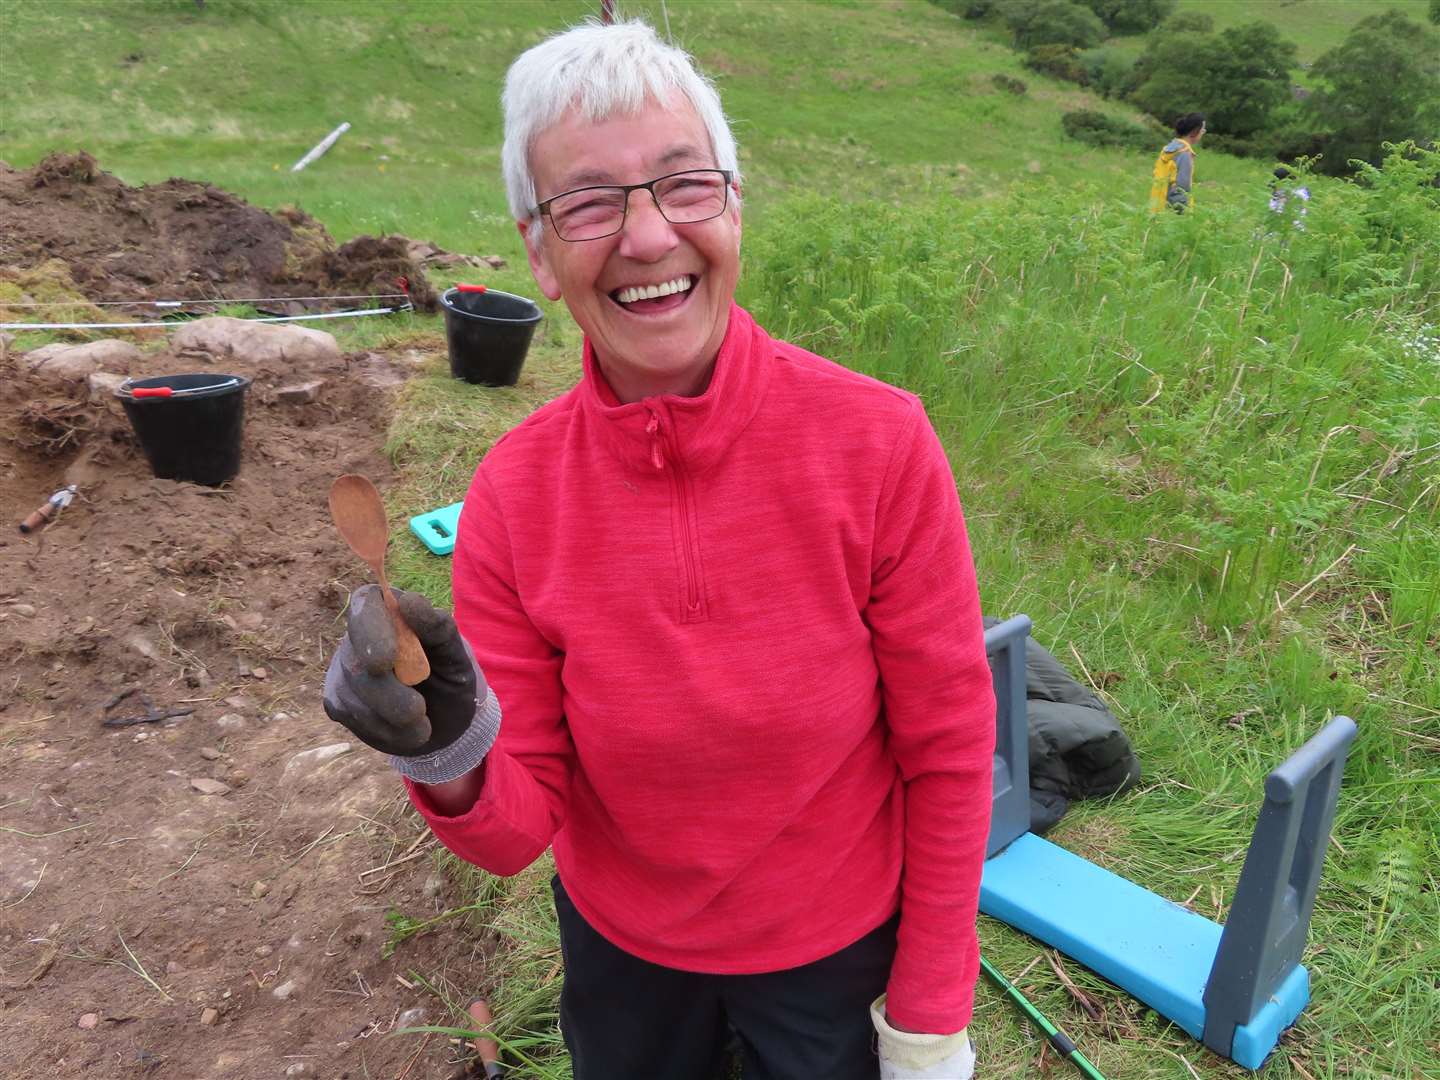 Delighted: Brora businesswoman Linda Graham, who runs Linda’s Cafe, volunteered at the dig and unearthed the carved bone spoon - but nearly discarded it.